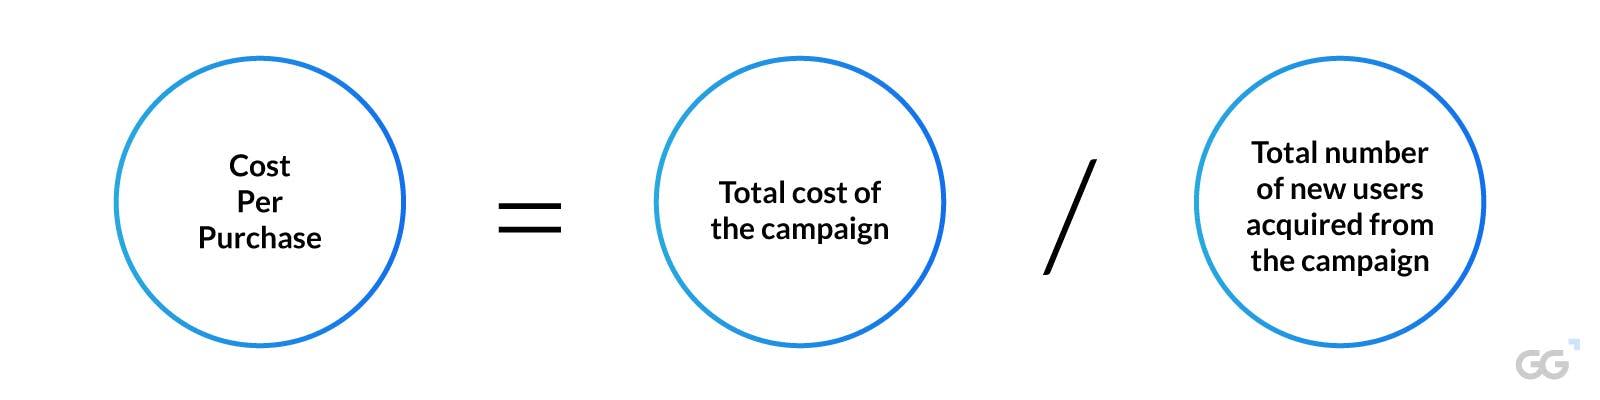 Infographic of Cost per purchase formula says "Cost per purchase = Total cost of the campaign / Total number of new users acquired from the campaign"